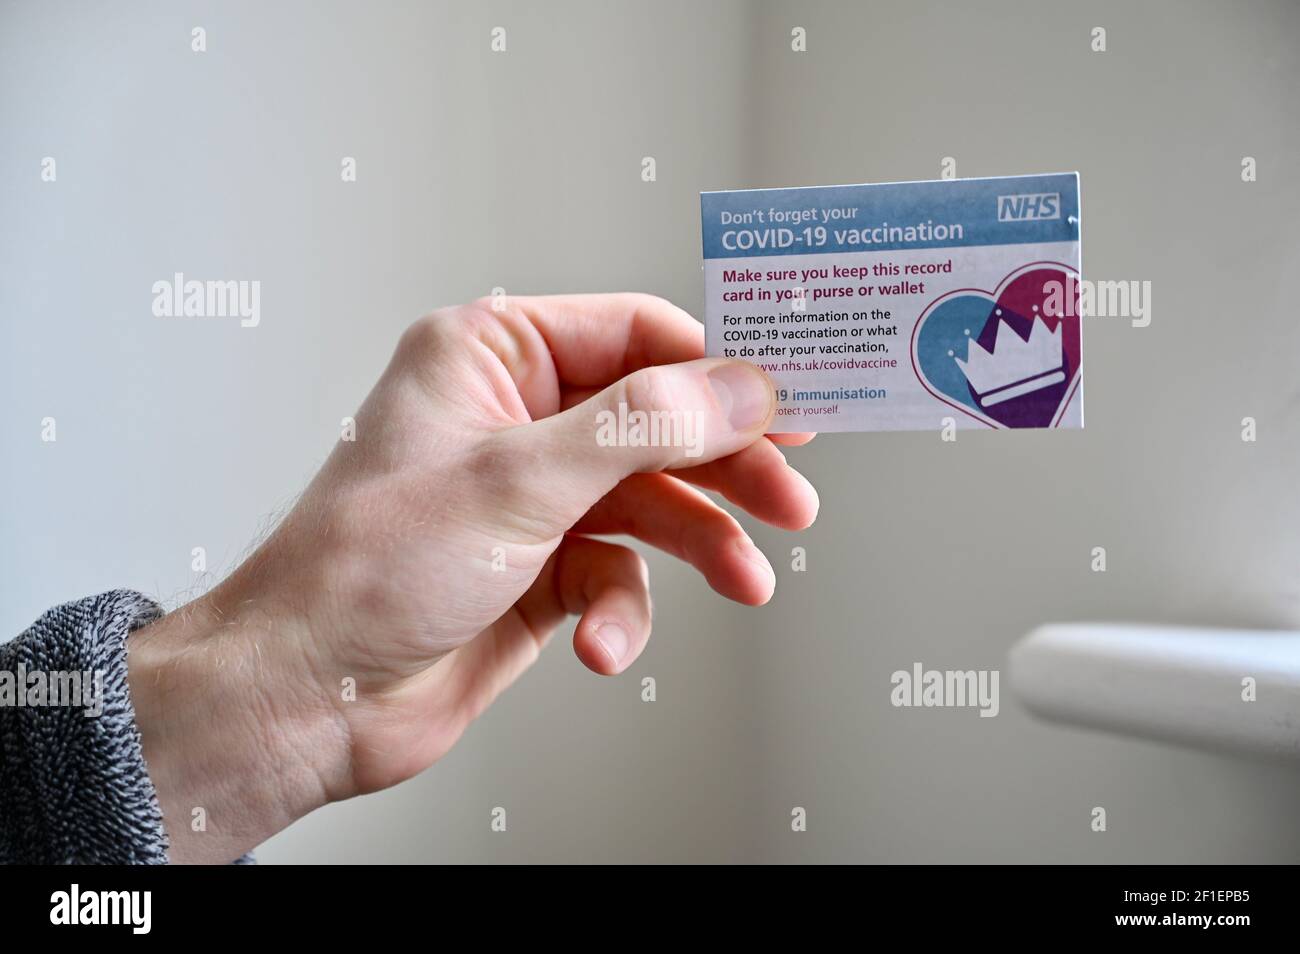 NHS COVID-19 Vaccination Card. Stock Photo